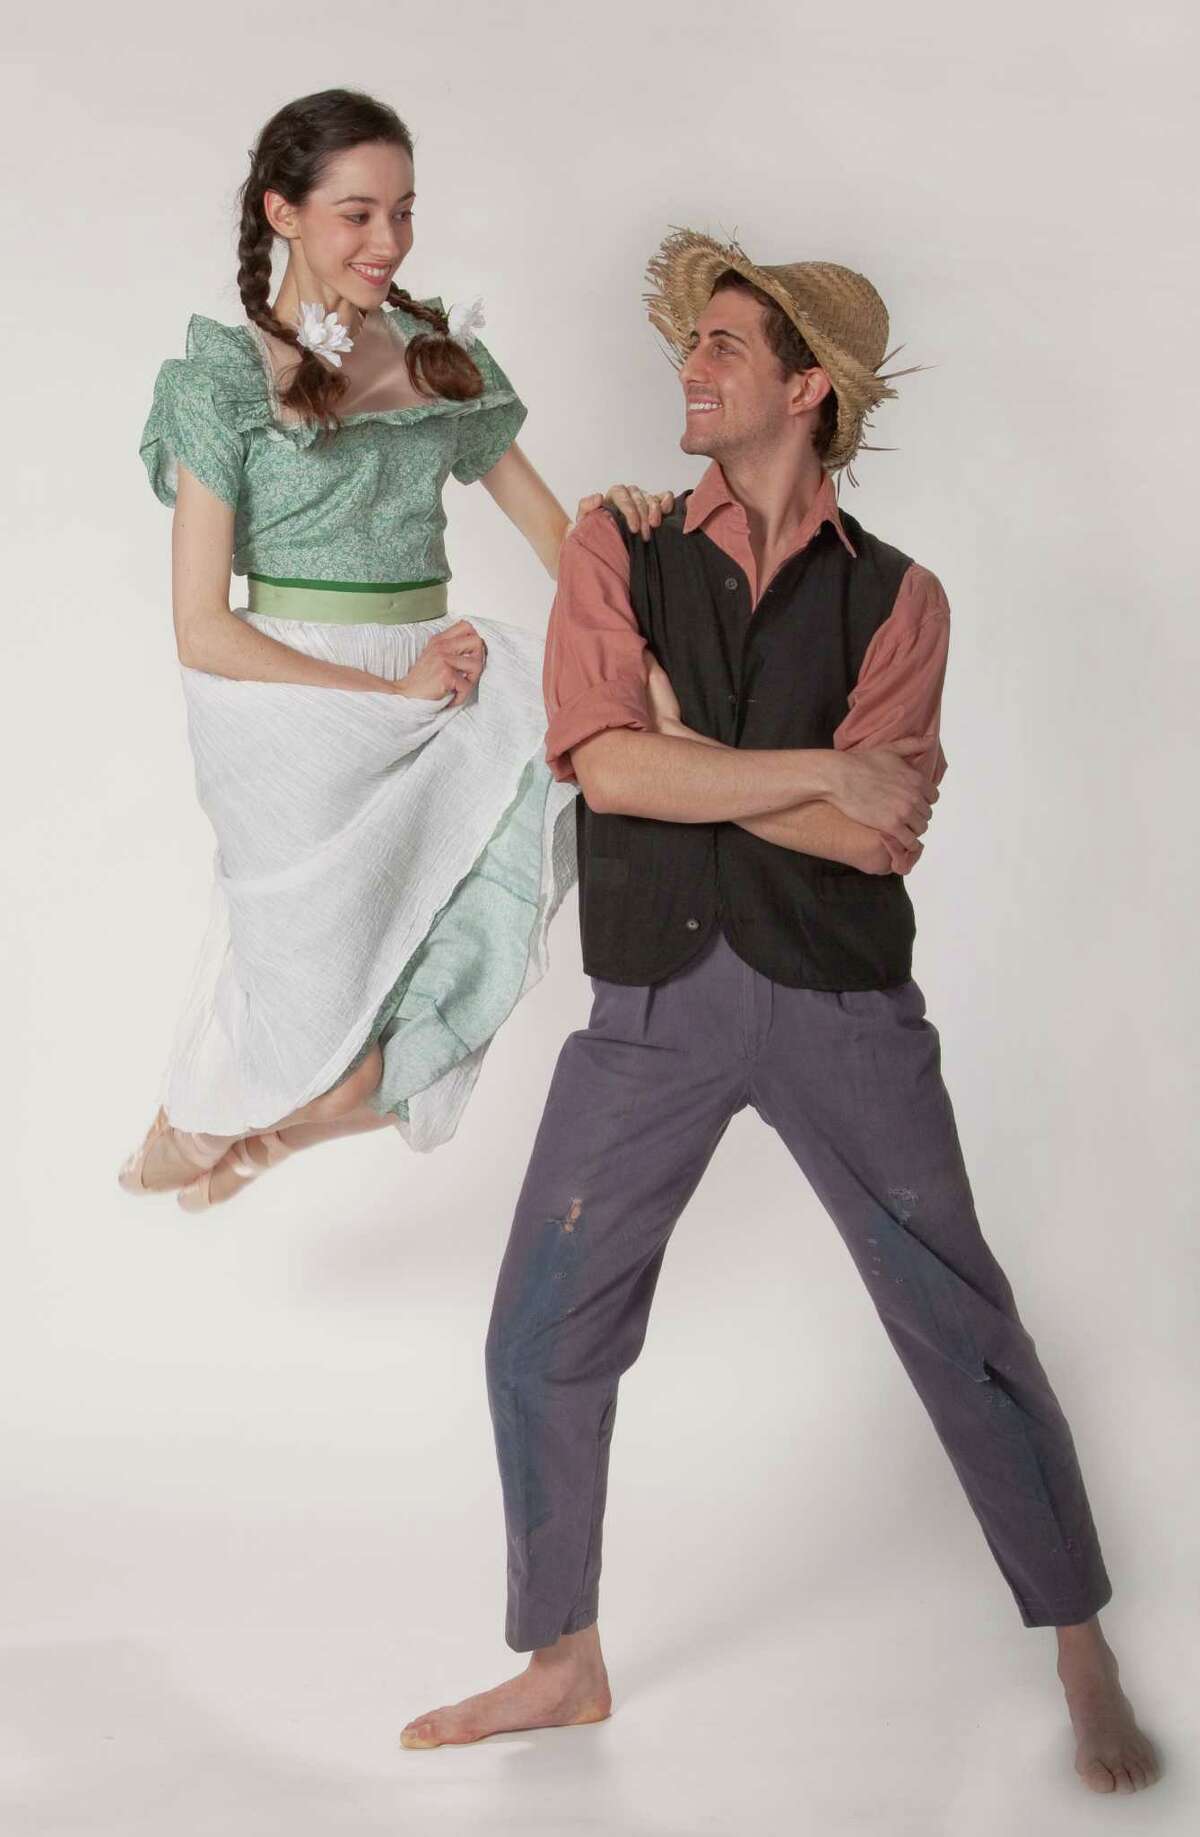 The story of Tom Sawyer will be presented as a ballet danced by the state's professional ballet company, Connecticut Ballet, at the Ridgefield Playhouse, in Ridgefield, Conn., on Saturday, Jan. 25, 2014. There will be two presentations, one at 11 a.m. and the second at 2 p.m.